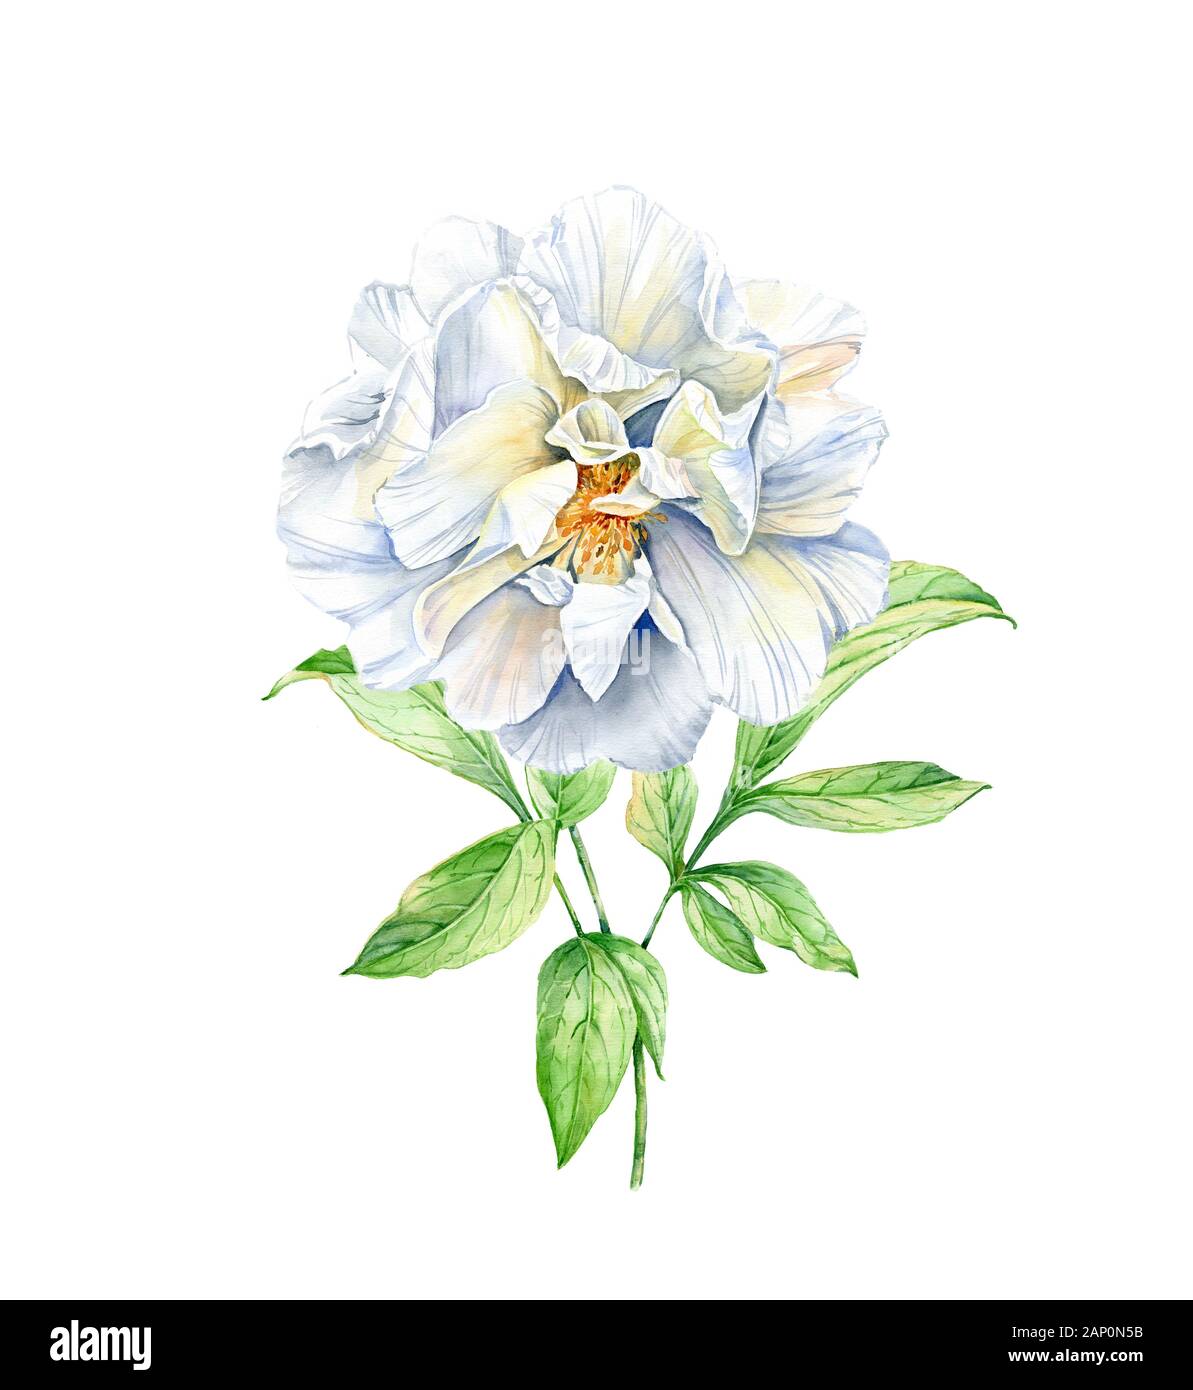 Watercolor white peony flower. Realistic petals with leaves isolated on white. Botanical floral illustration for wedding design, cosmetics Stock Photo